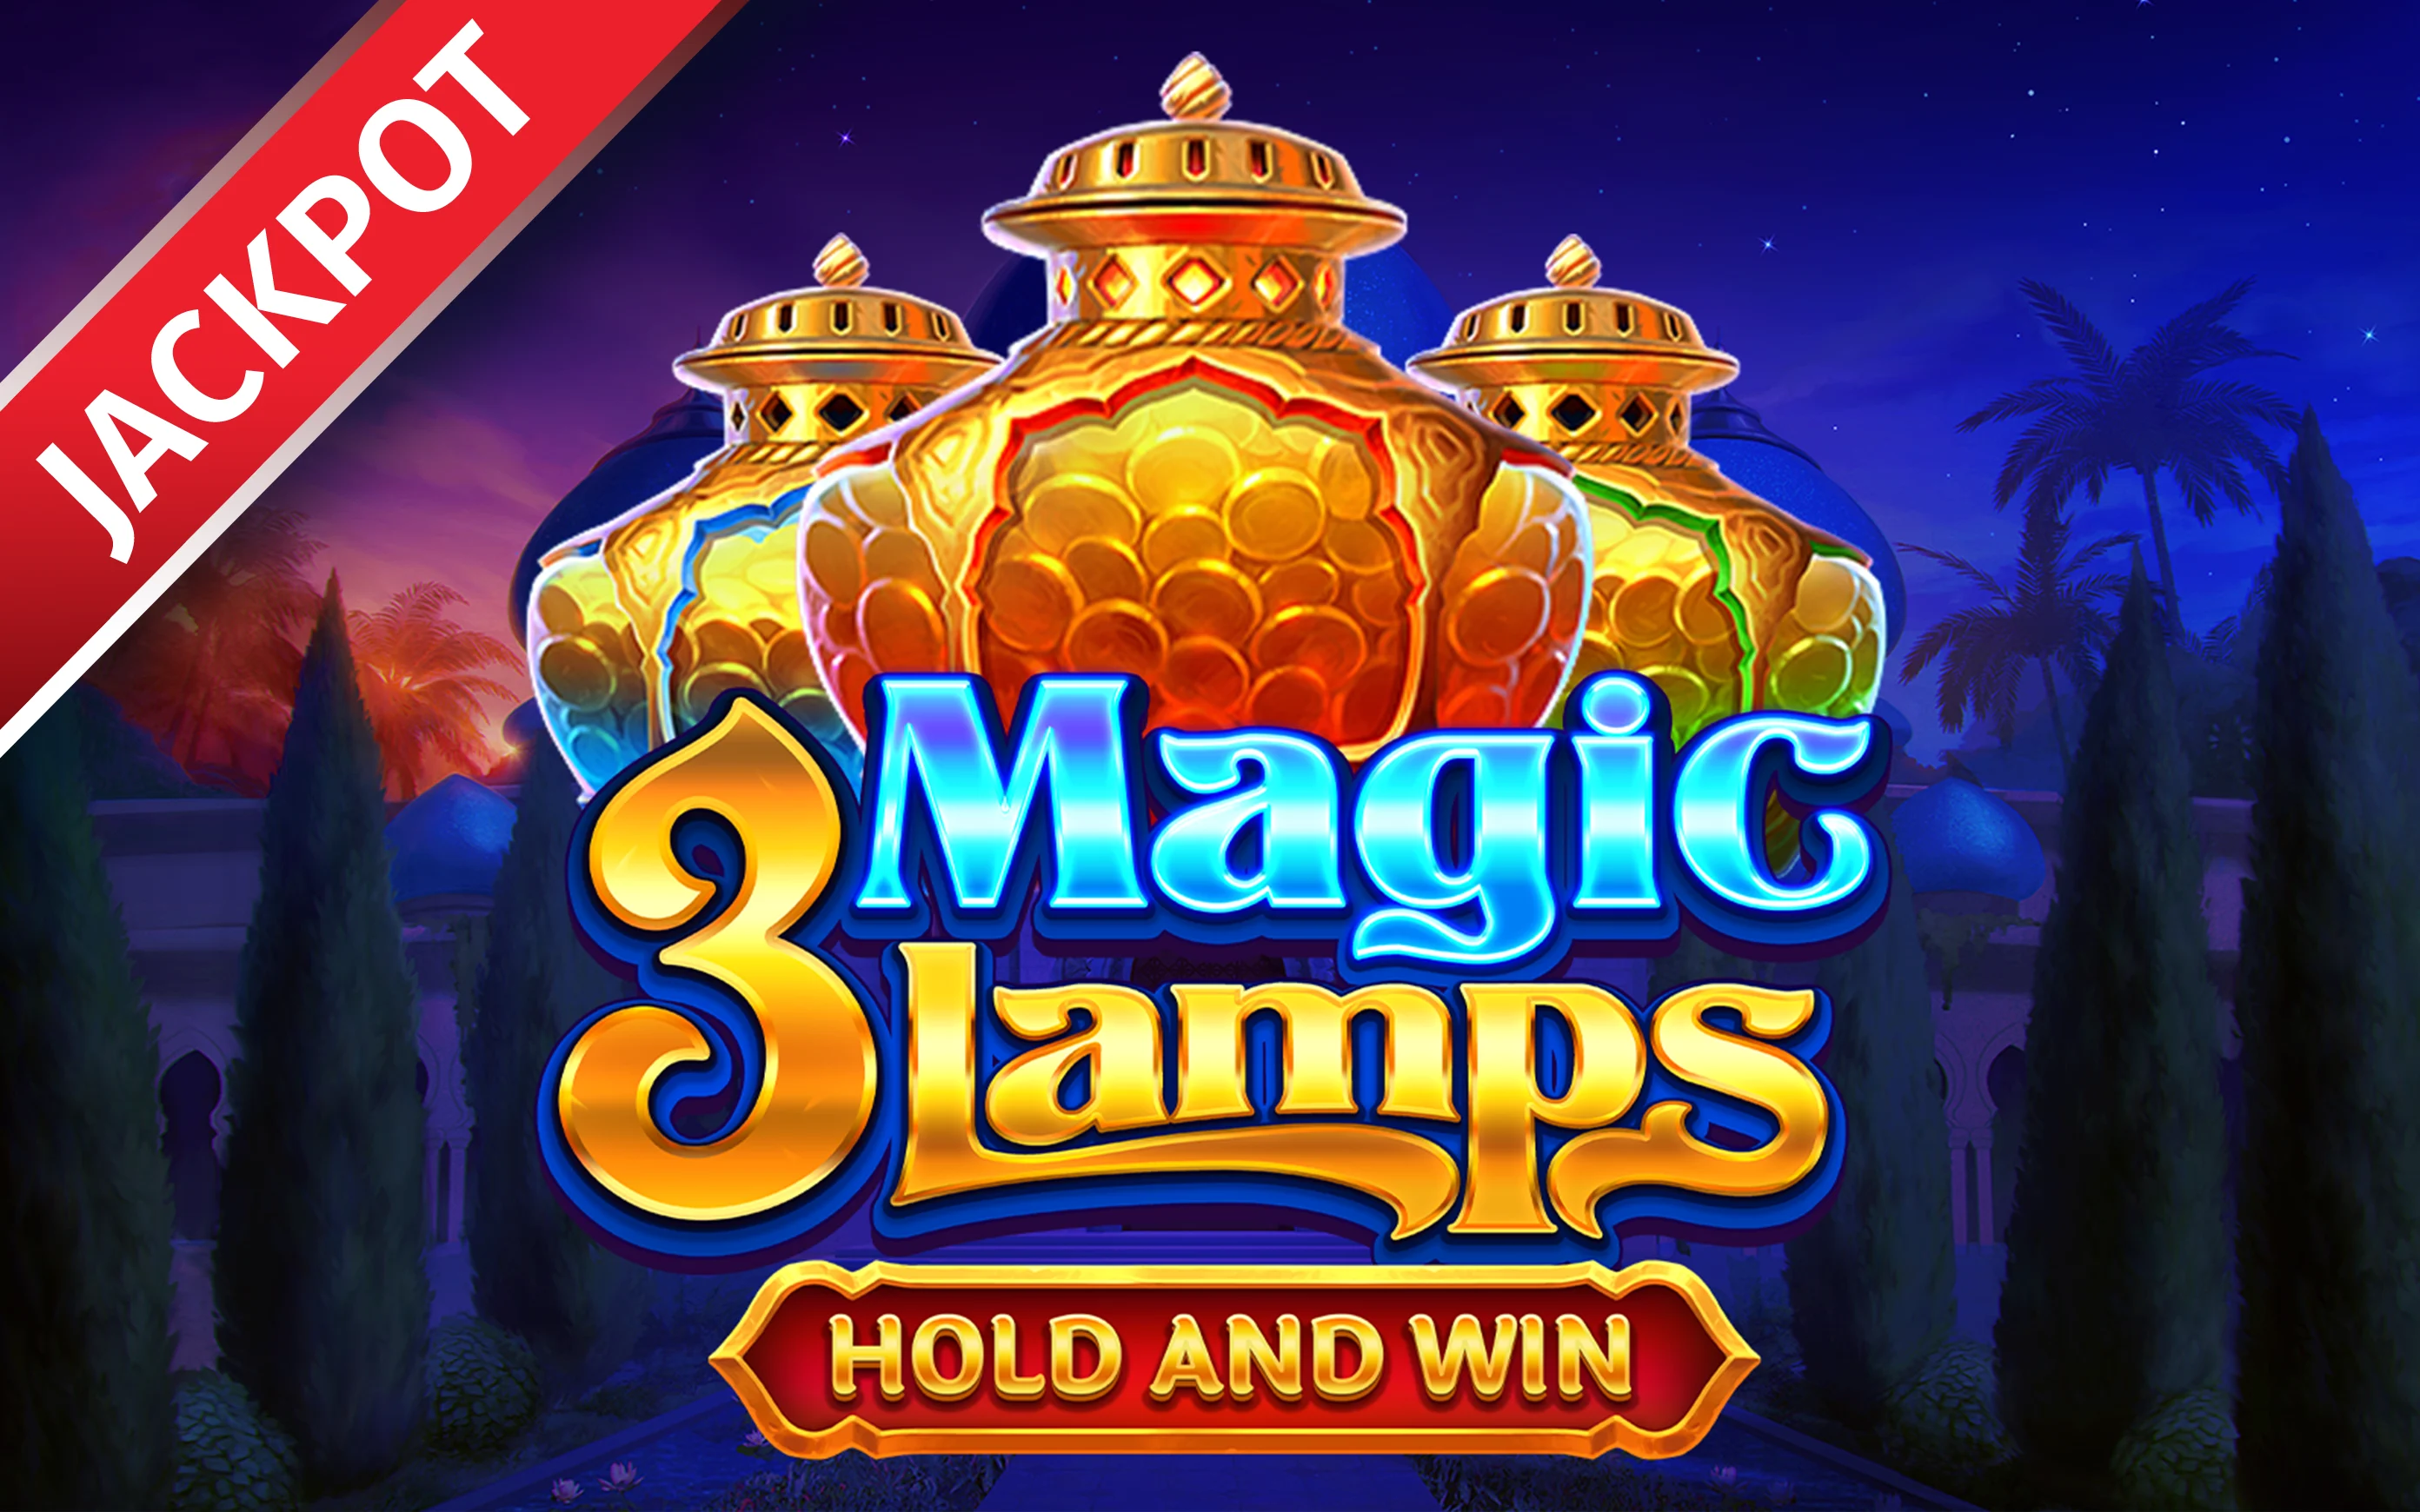 Speel 3 Magic Lamps: Hold and Win op Starcasino.be online casino